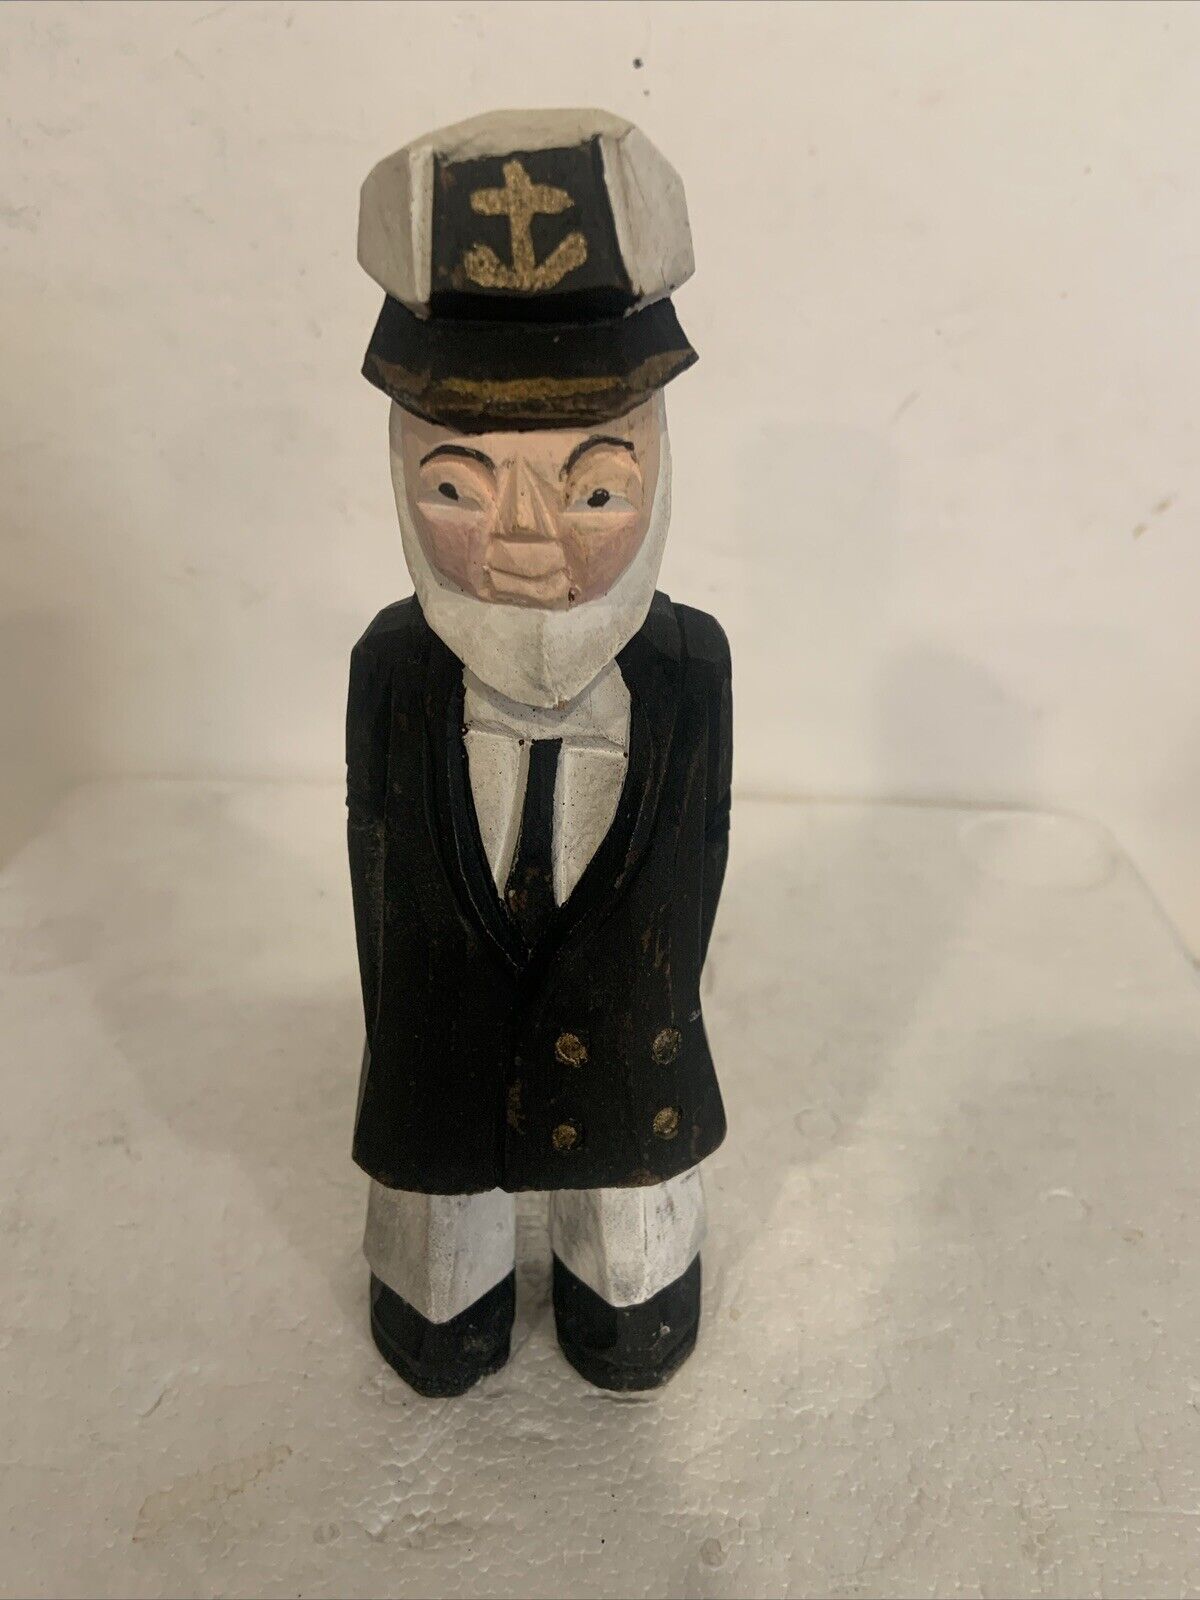 Vntg Wooden Sailor Figurine Sea Captain 7” Handmade Carved Painted RARE See All